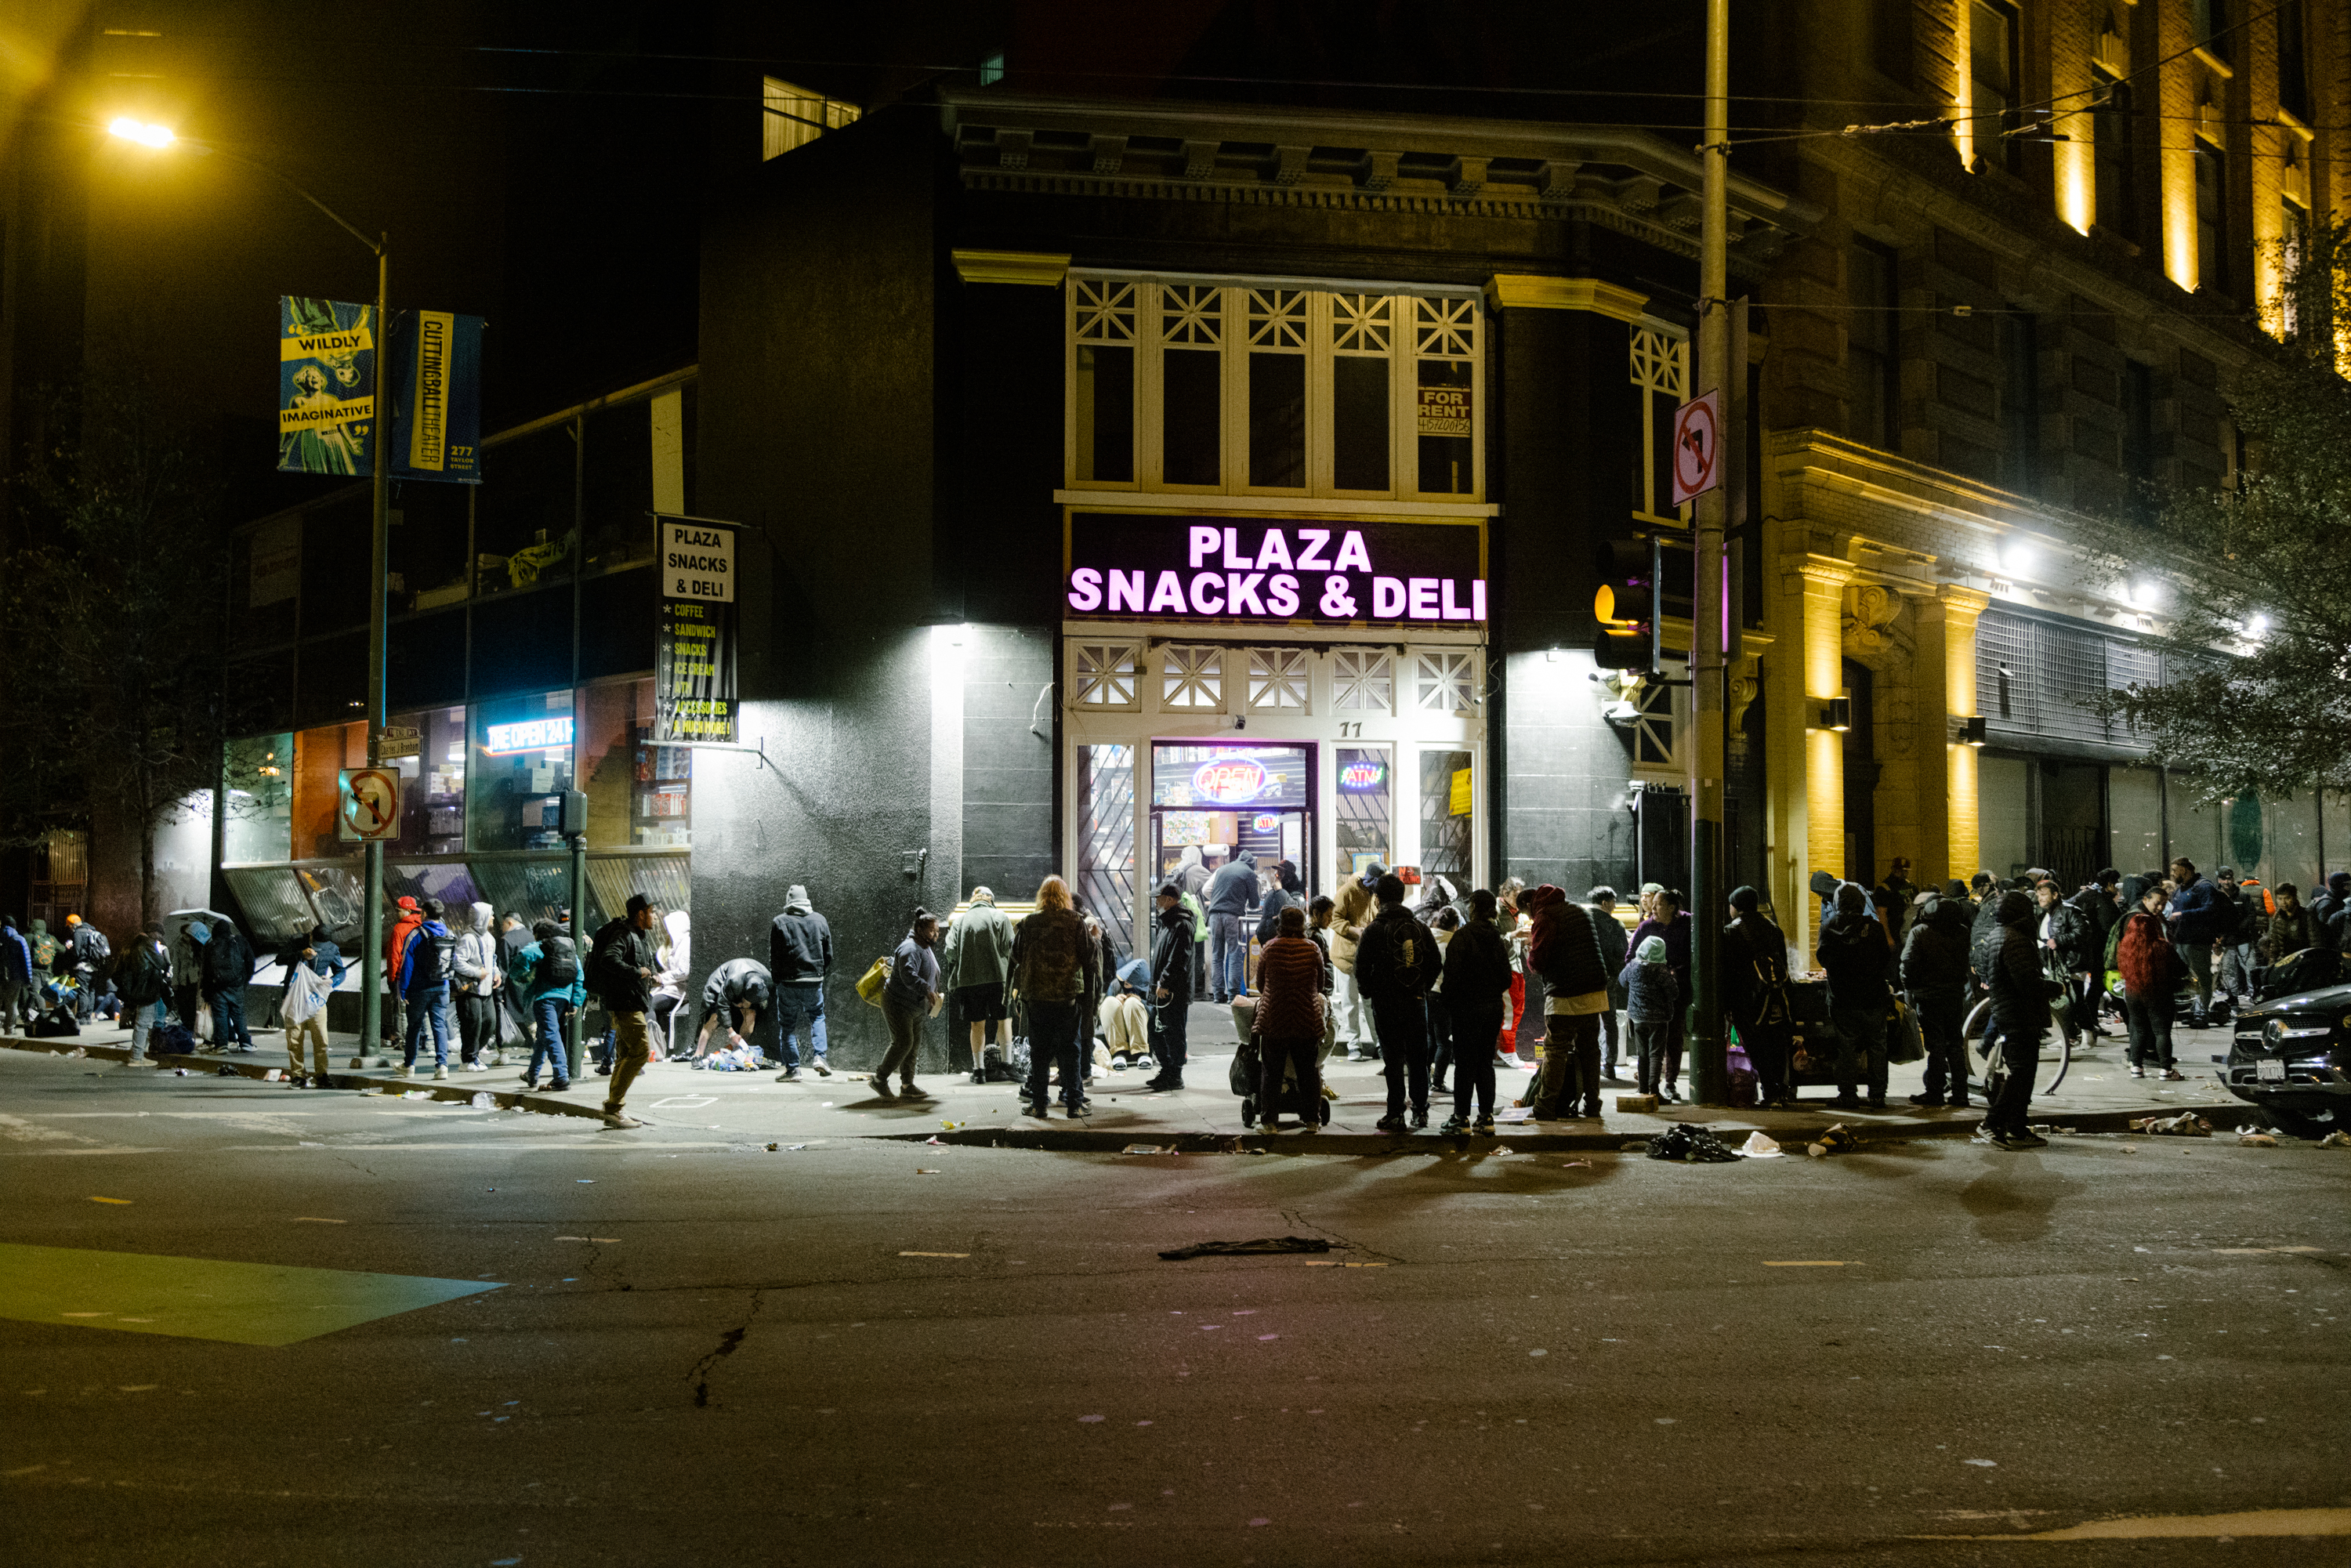 A bustling night scene outside 'Plaza Snacks &amp; Deli', with a crowd of people on the sidewalk.